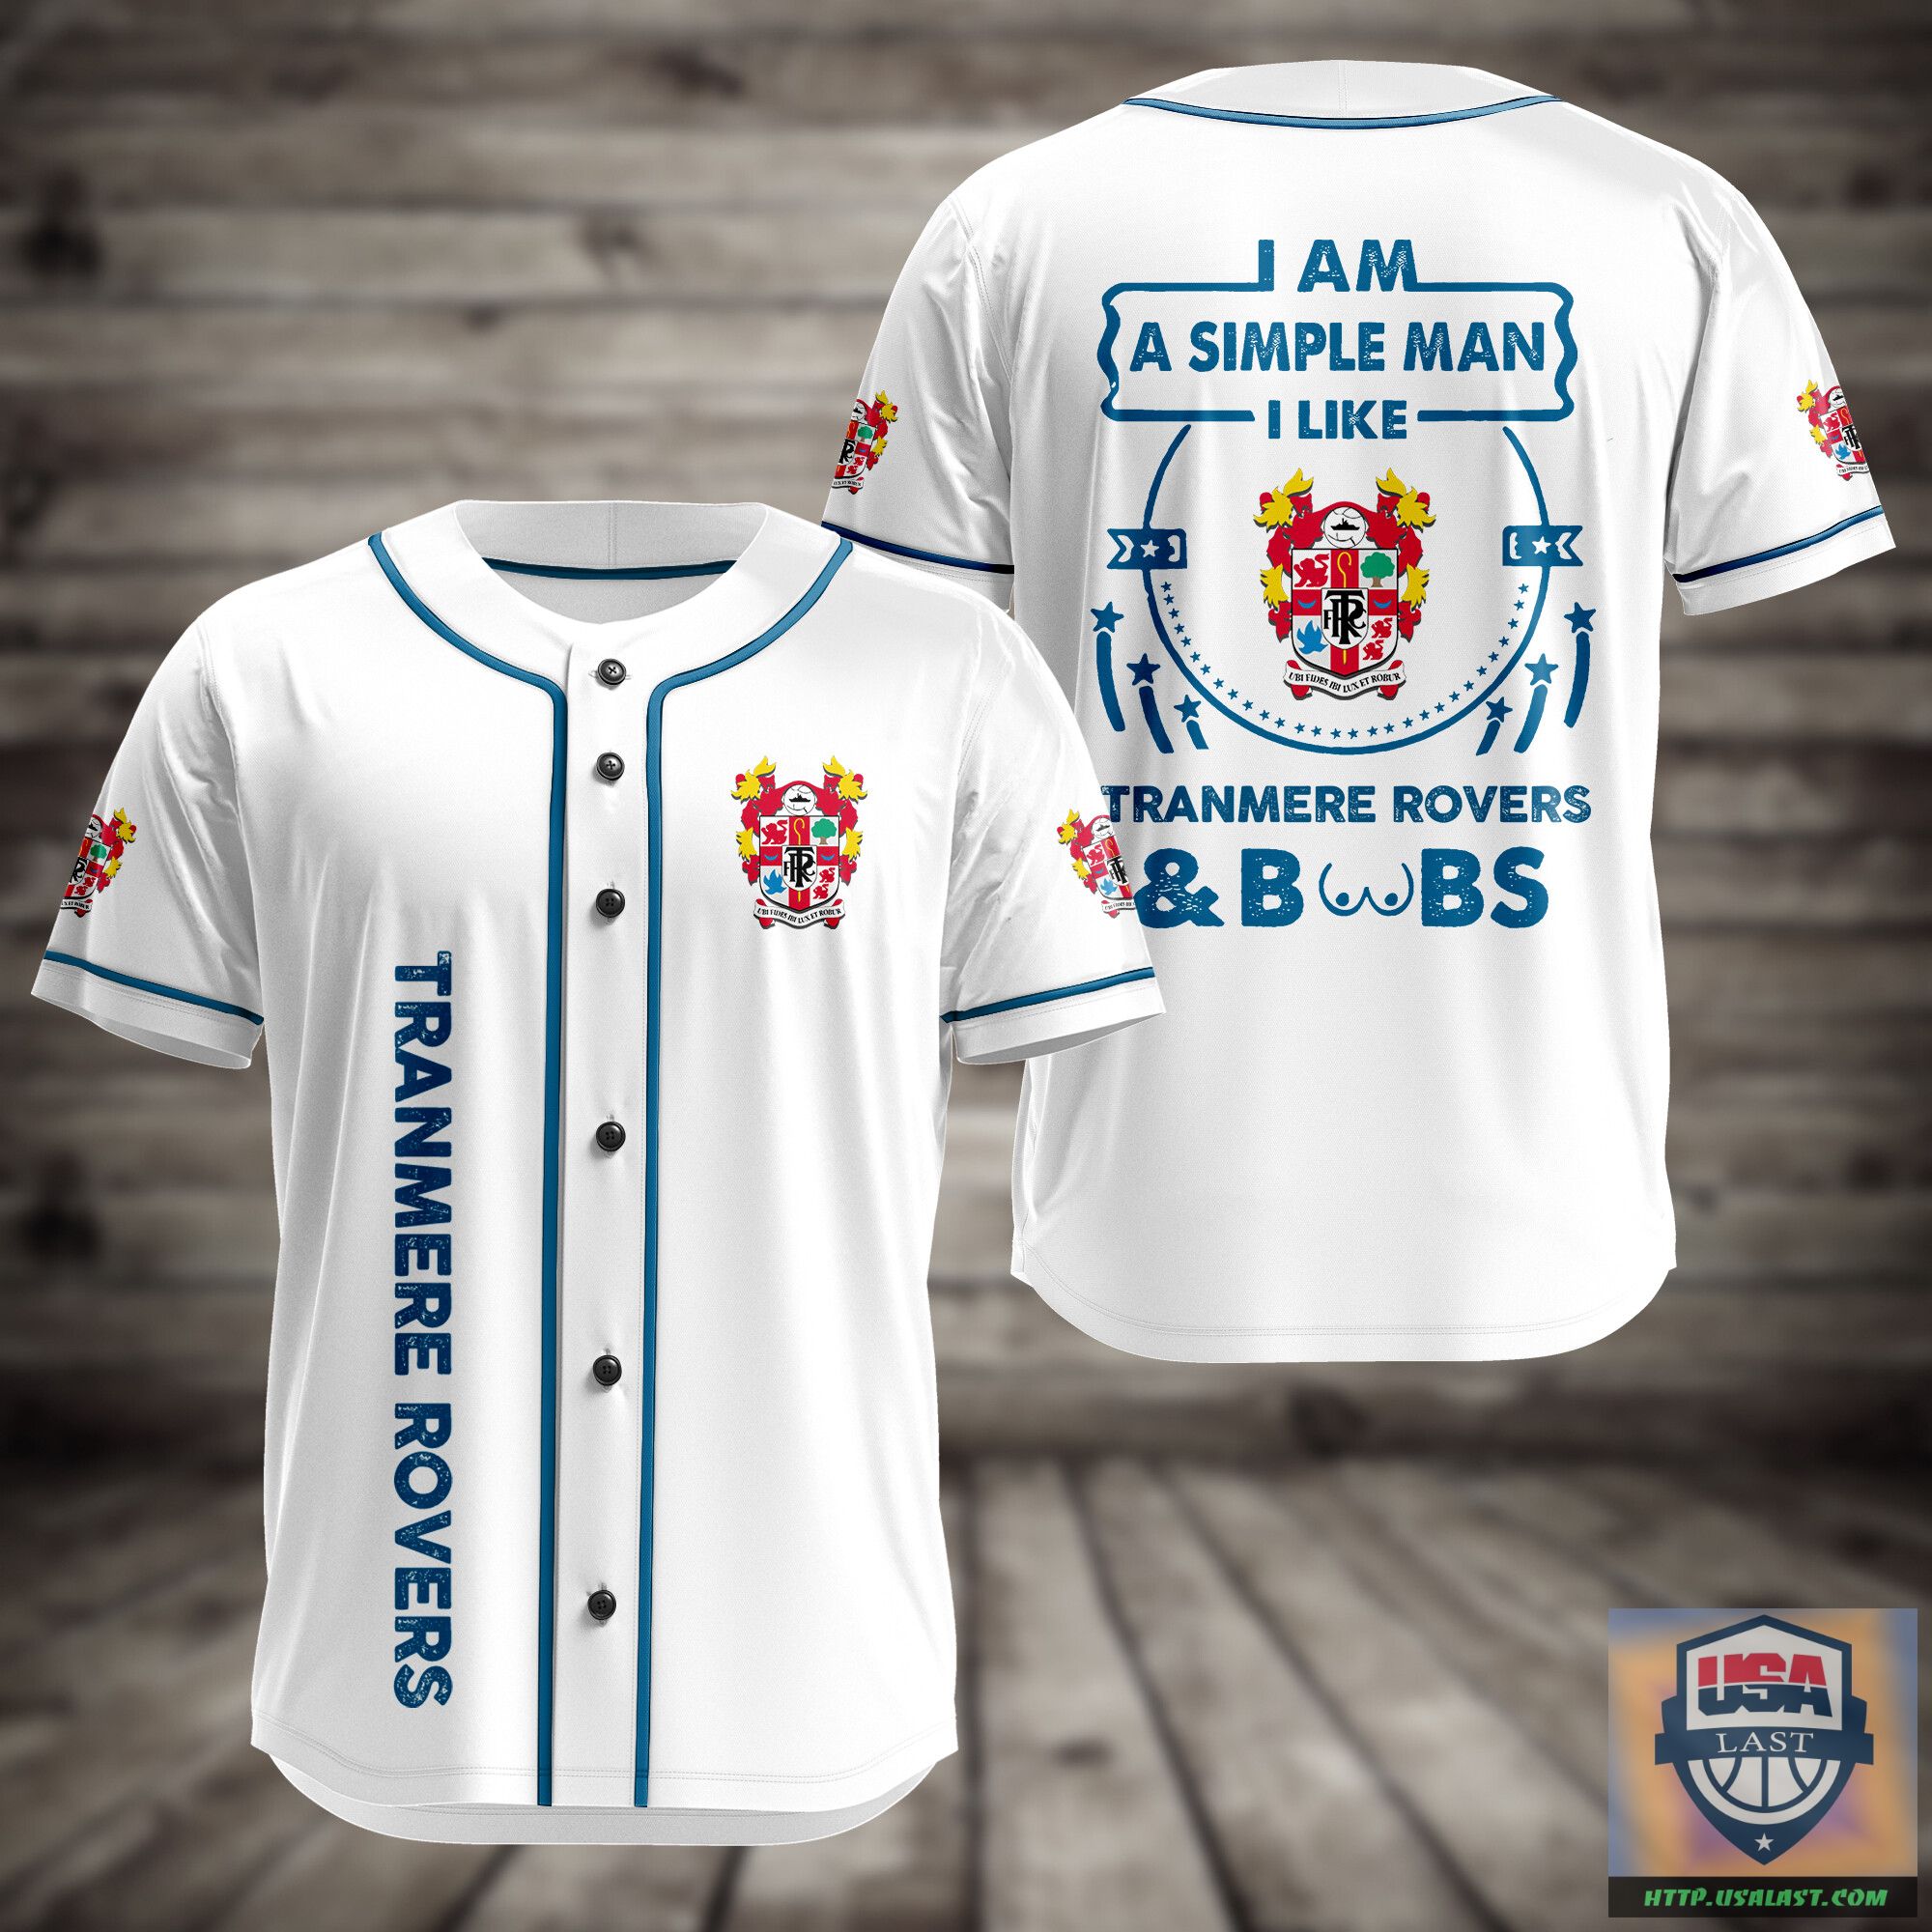 lTHh62q5-T020822-91xxxI-Am-Simple-Man-I-Like-Tranmere-Rovers-And-Boobs-Baseball-Jersey.jpg